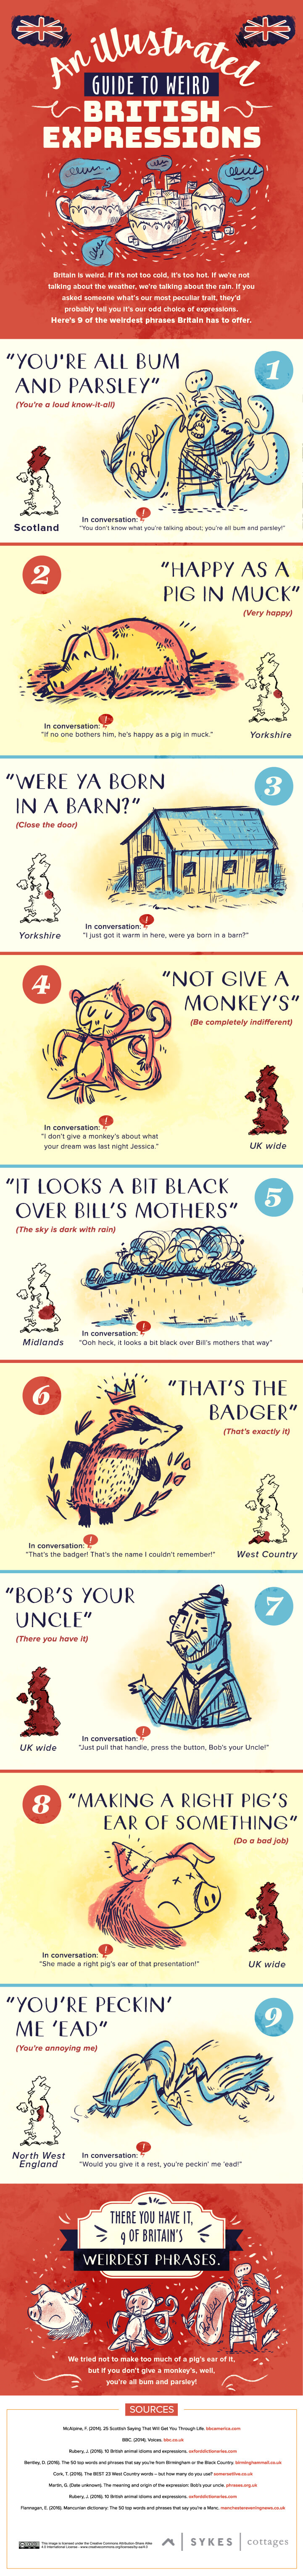 An Illustrated Guide to Weird British Expressions - Sykes Holiday Cottages